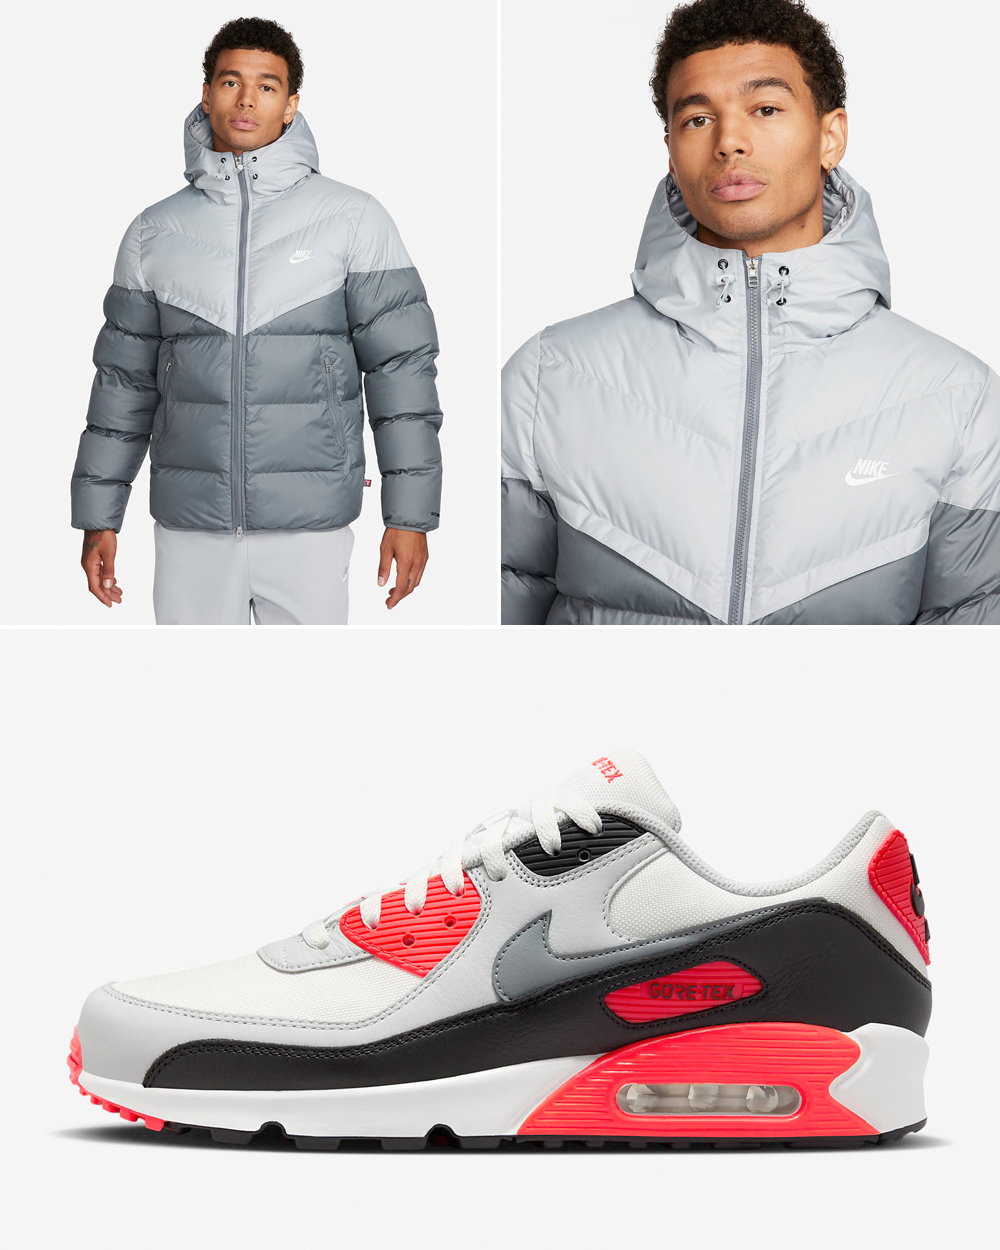 Nike Air Max 90 Gore Tex Infrared Jacket Matching Outfit